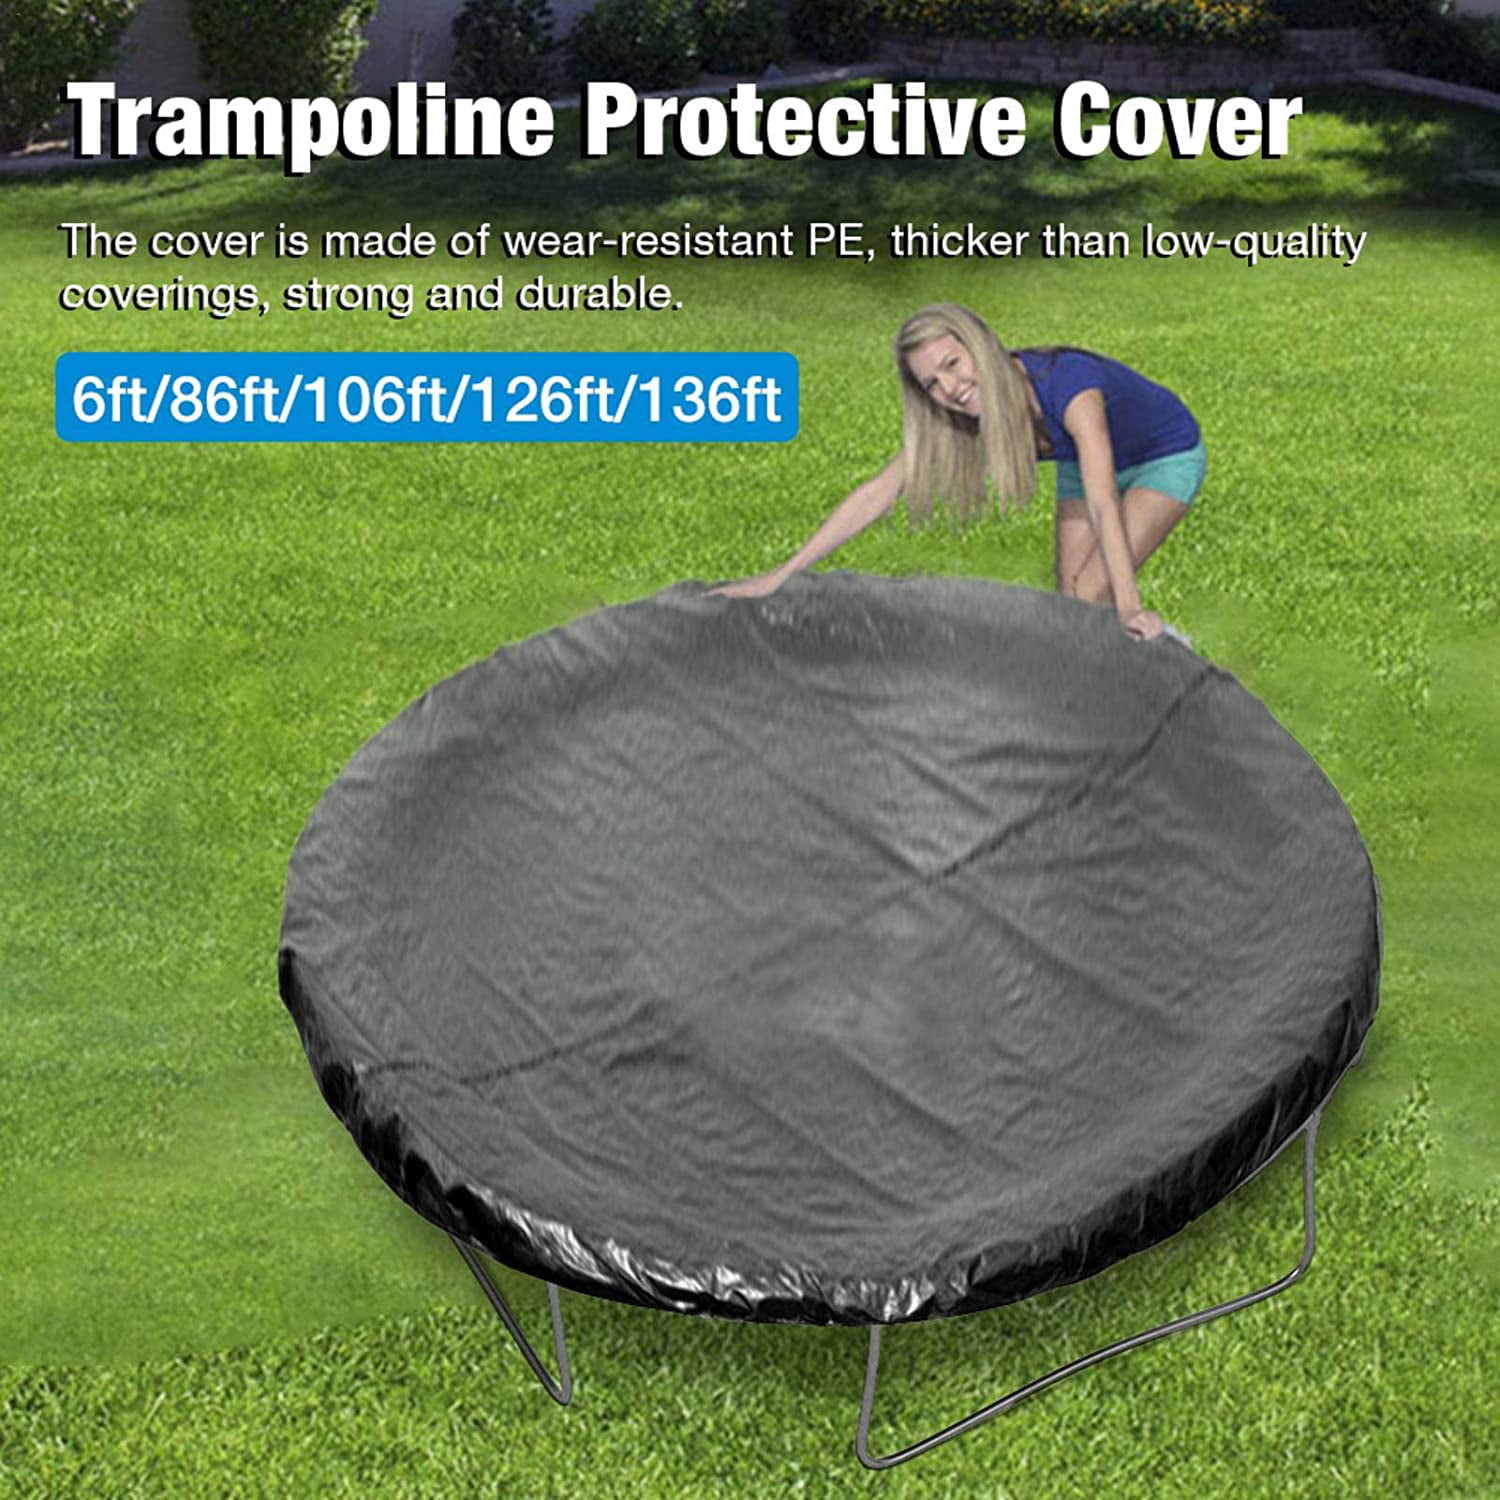 A/A Round Trampoline Cover 6/8/10/12/13 Inch Rain Snow Sun Shade Protection Cover Rainproof UV Resistant Wear-Resistant Trampoline Protective Cover 